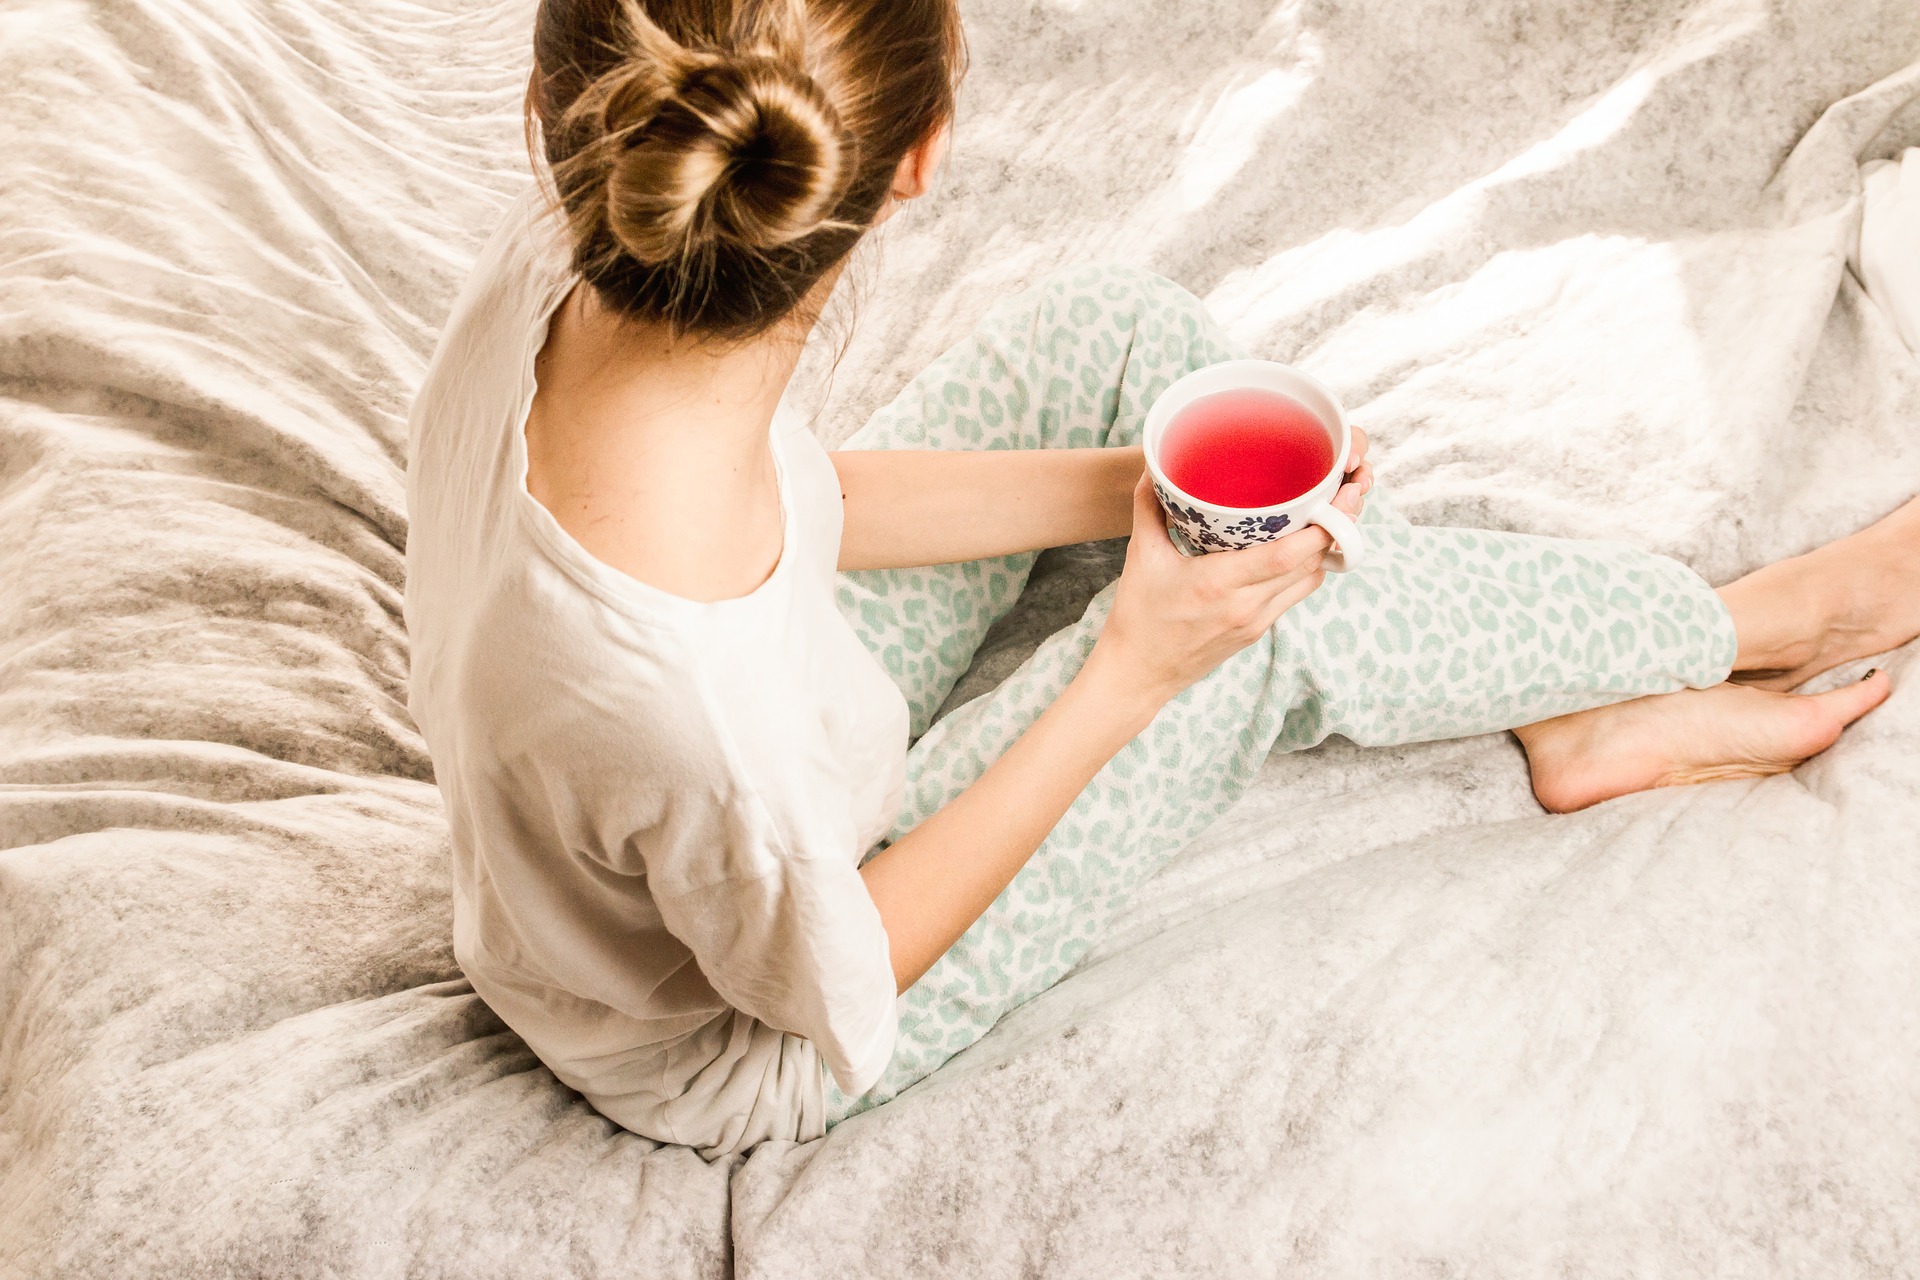 7 Morning Habits That Make Your Day Better